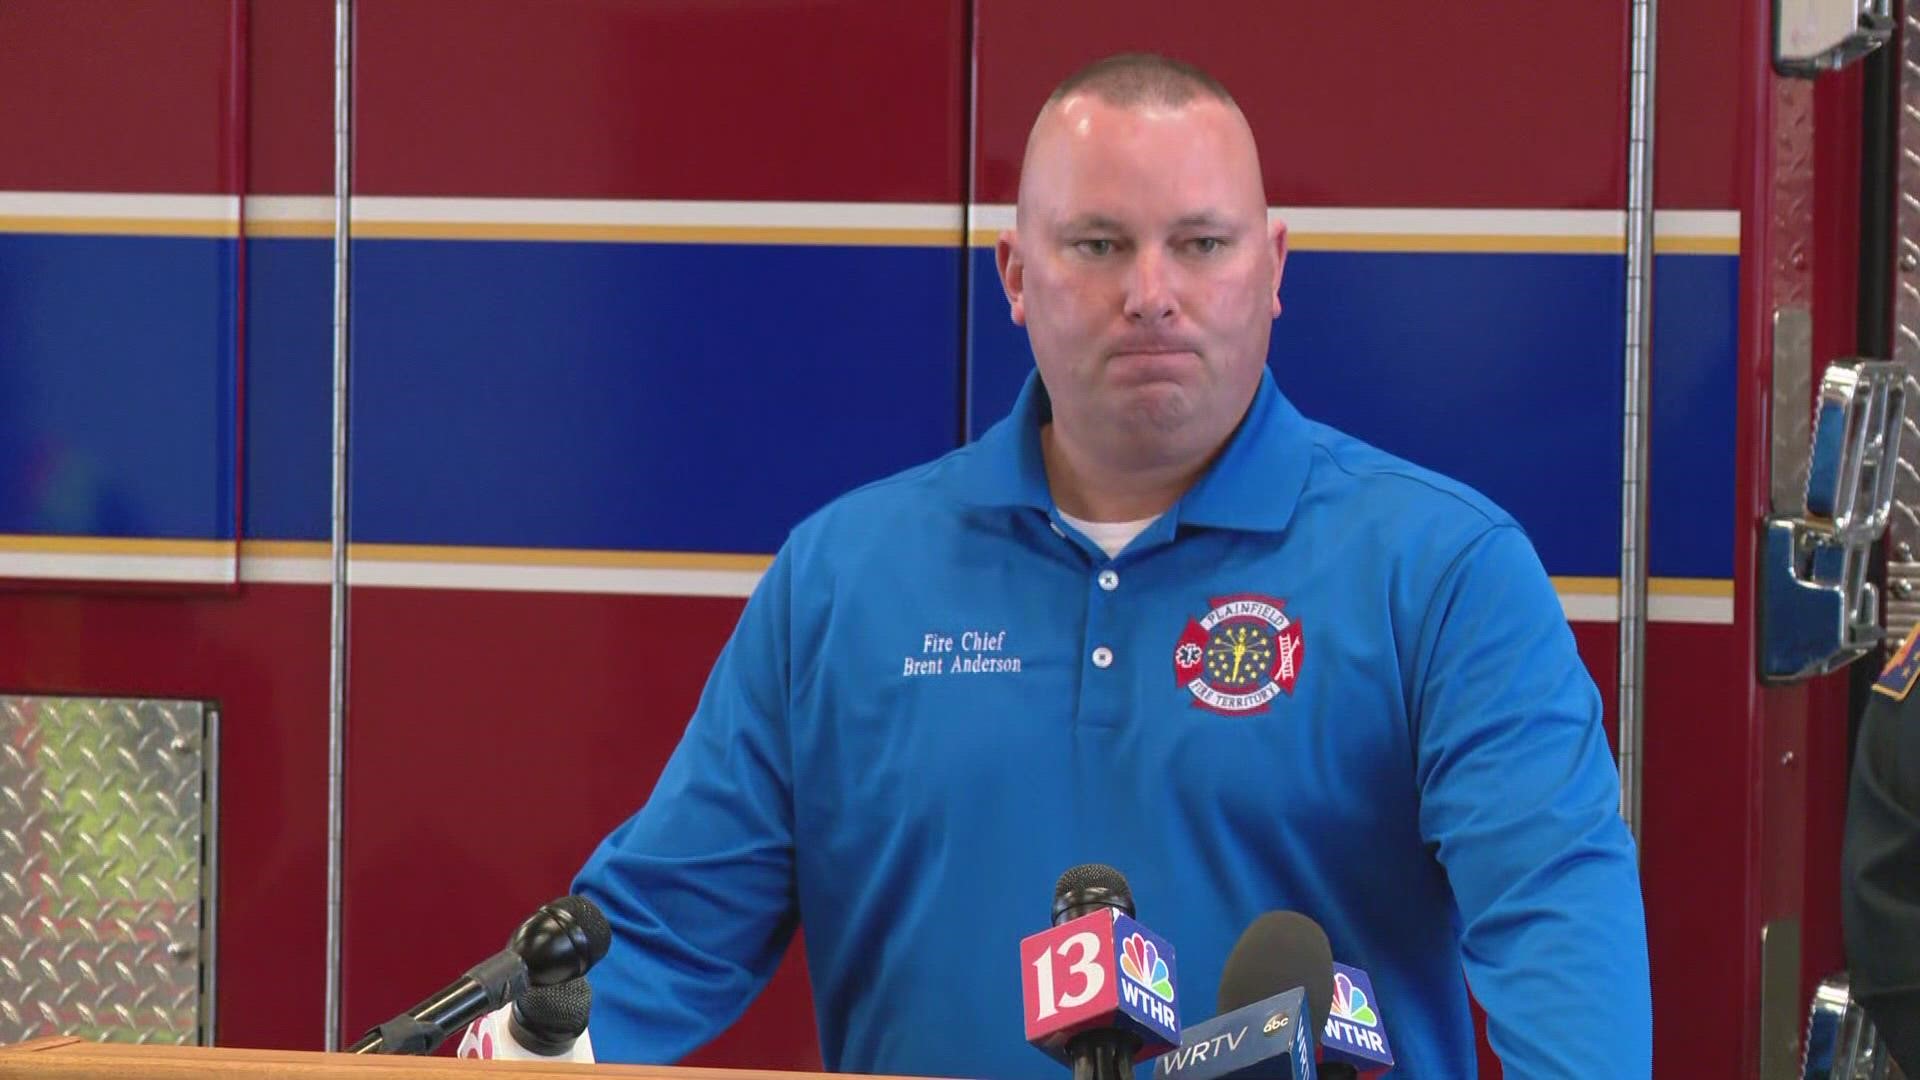 Plainfield Fire Department Chief Brent Anderson said the fire suppression system at the facility was working correctly at the time firefighters arrived.